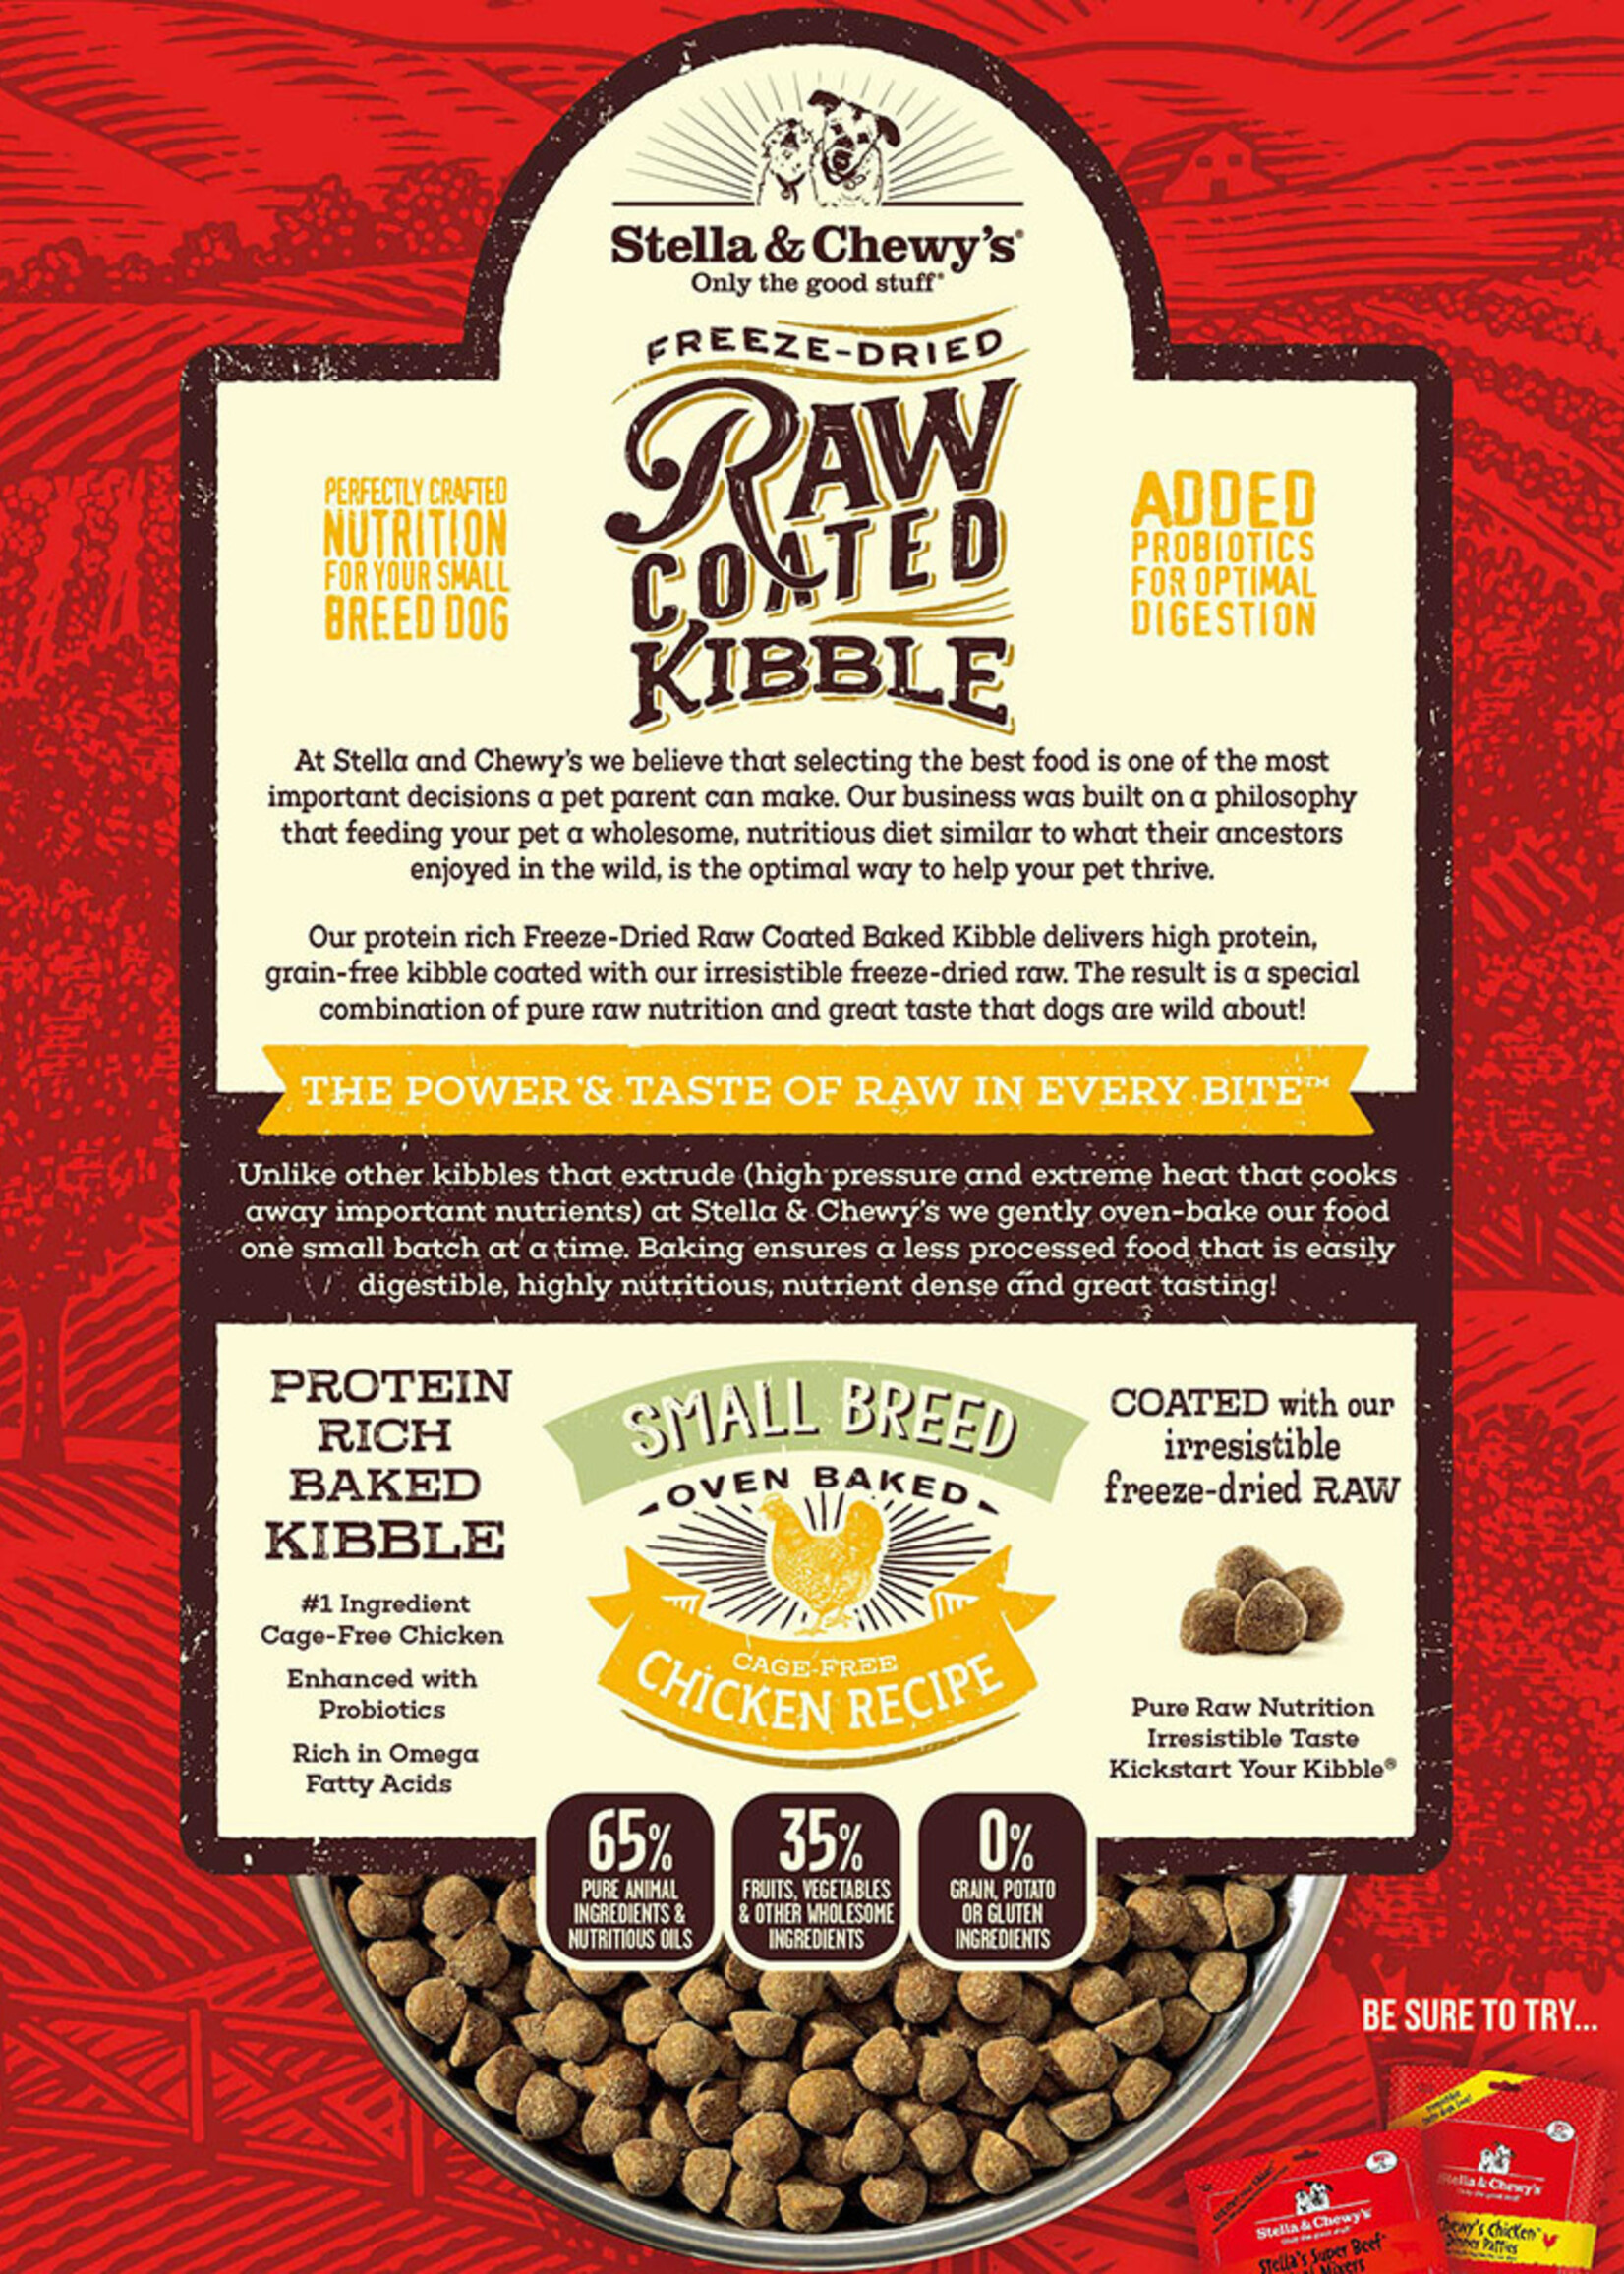 Stella & Chewy's Stella & Chewy's Raw Coated Kibble Small Breed Cage-Free Chicken Recipe Dry Dog Food